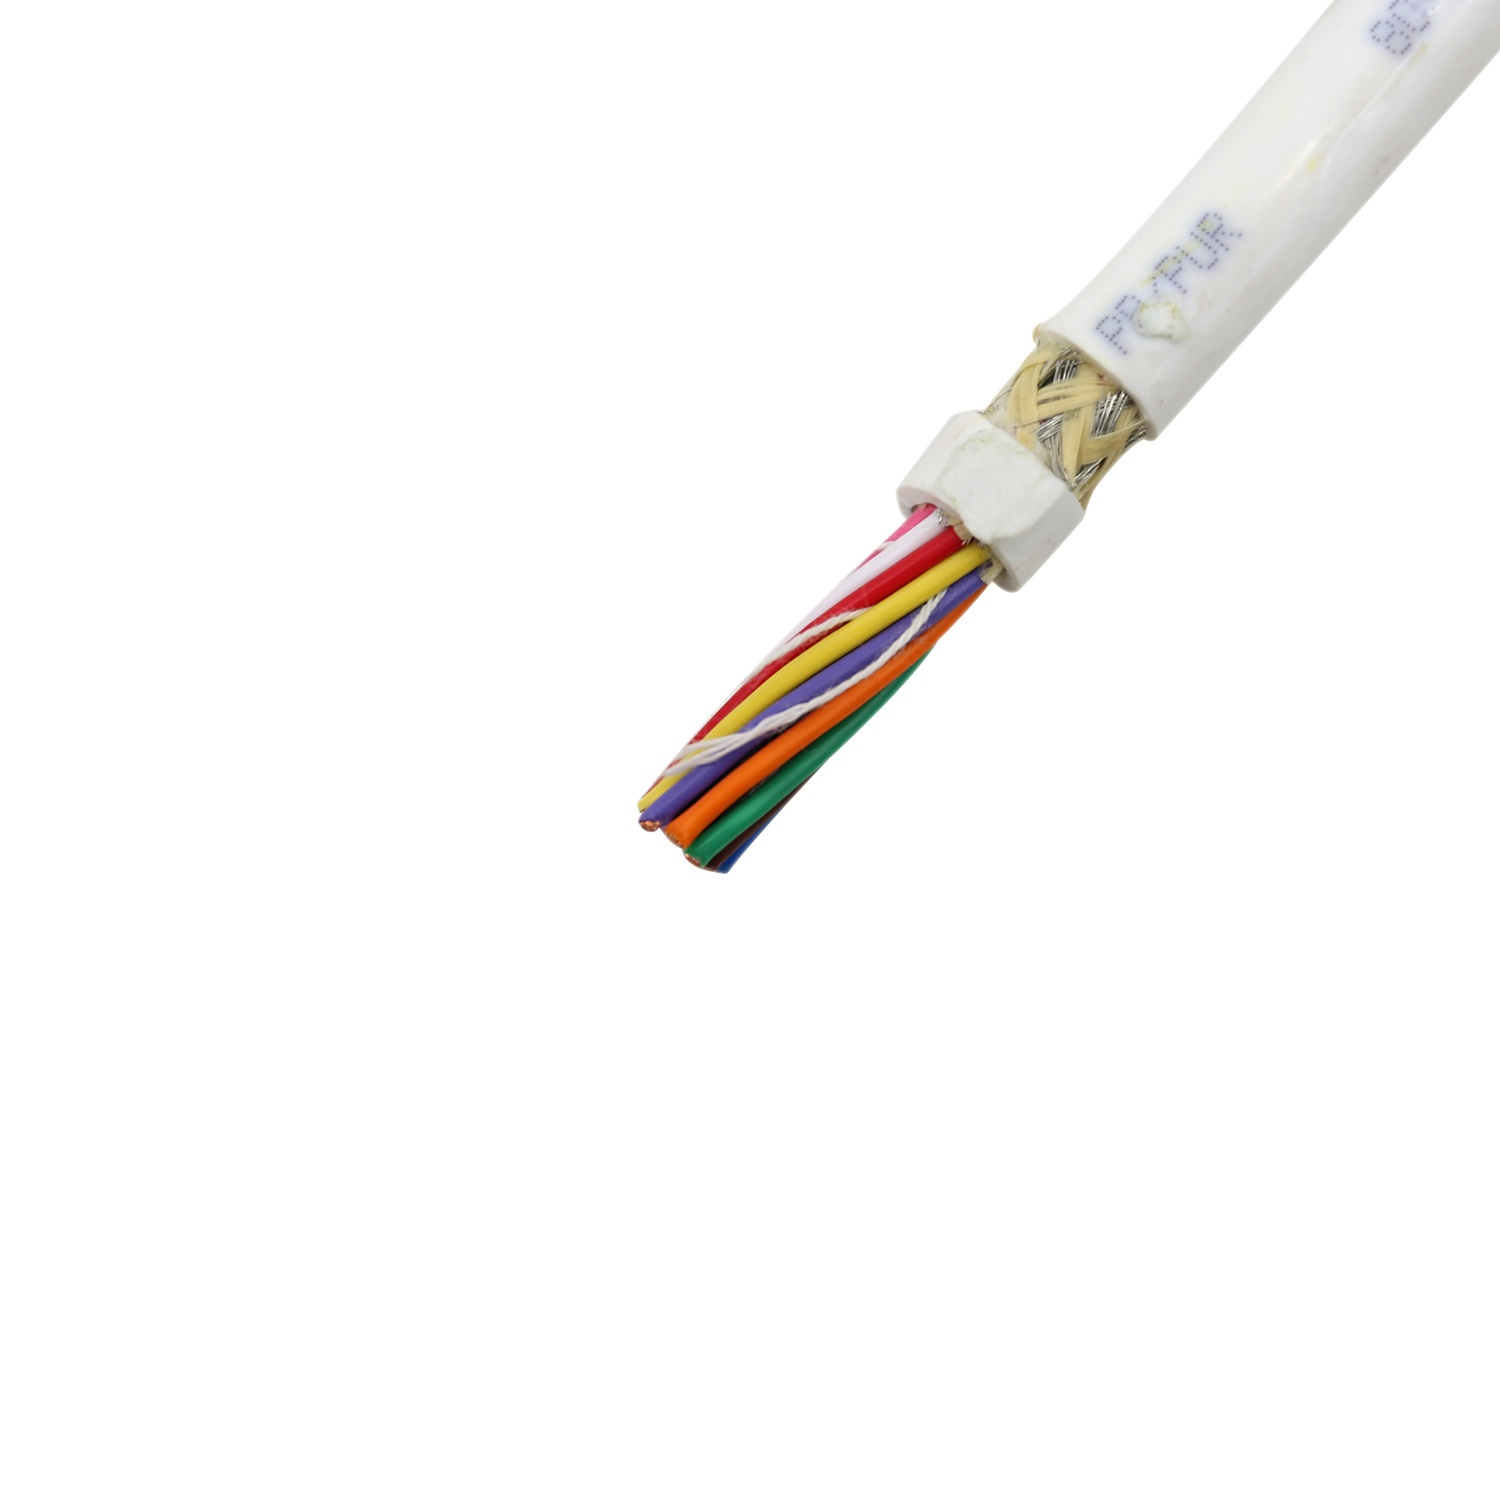 Cable, Power Cable, PVC Cable, Instrument Cable